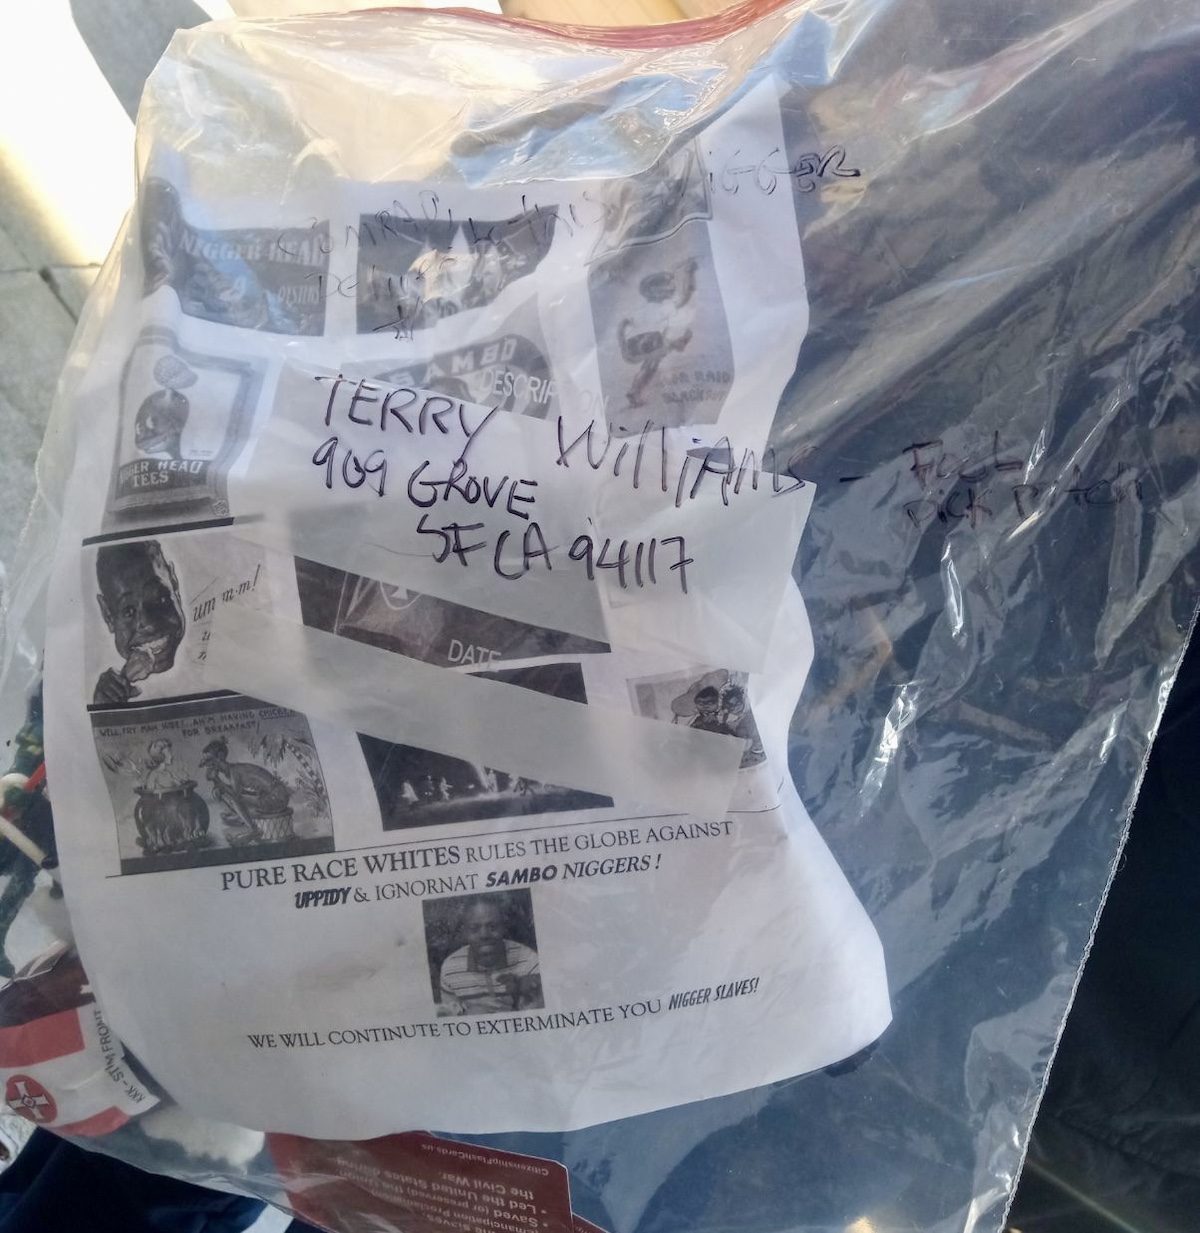 KKK flag and printout calling for ‘extermination’ left at man’s home in second incident